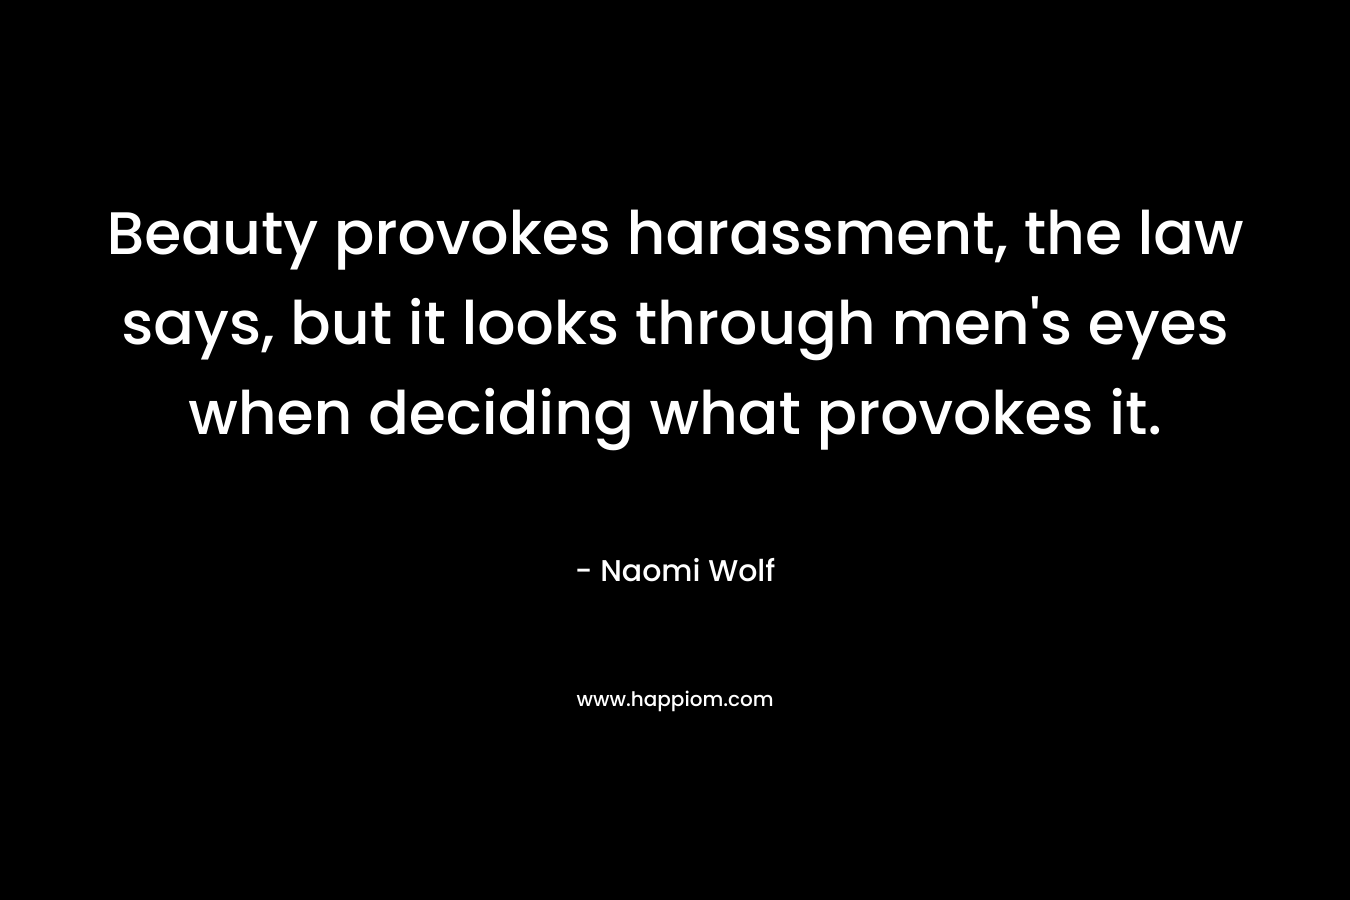 Beauty provokes harassment, the law says, but it looks through men's eyes when deciding what provokes it.